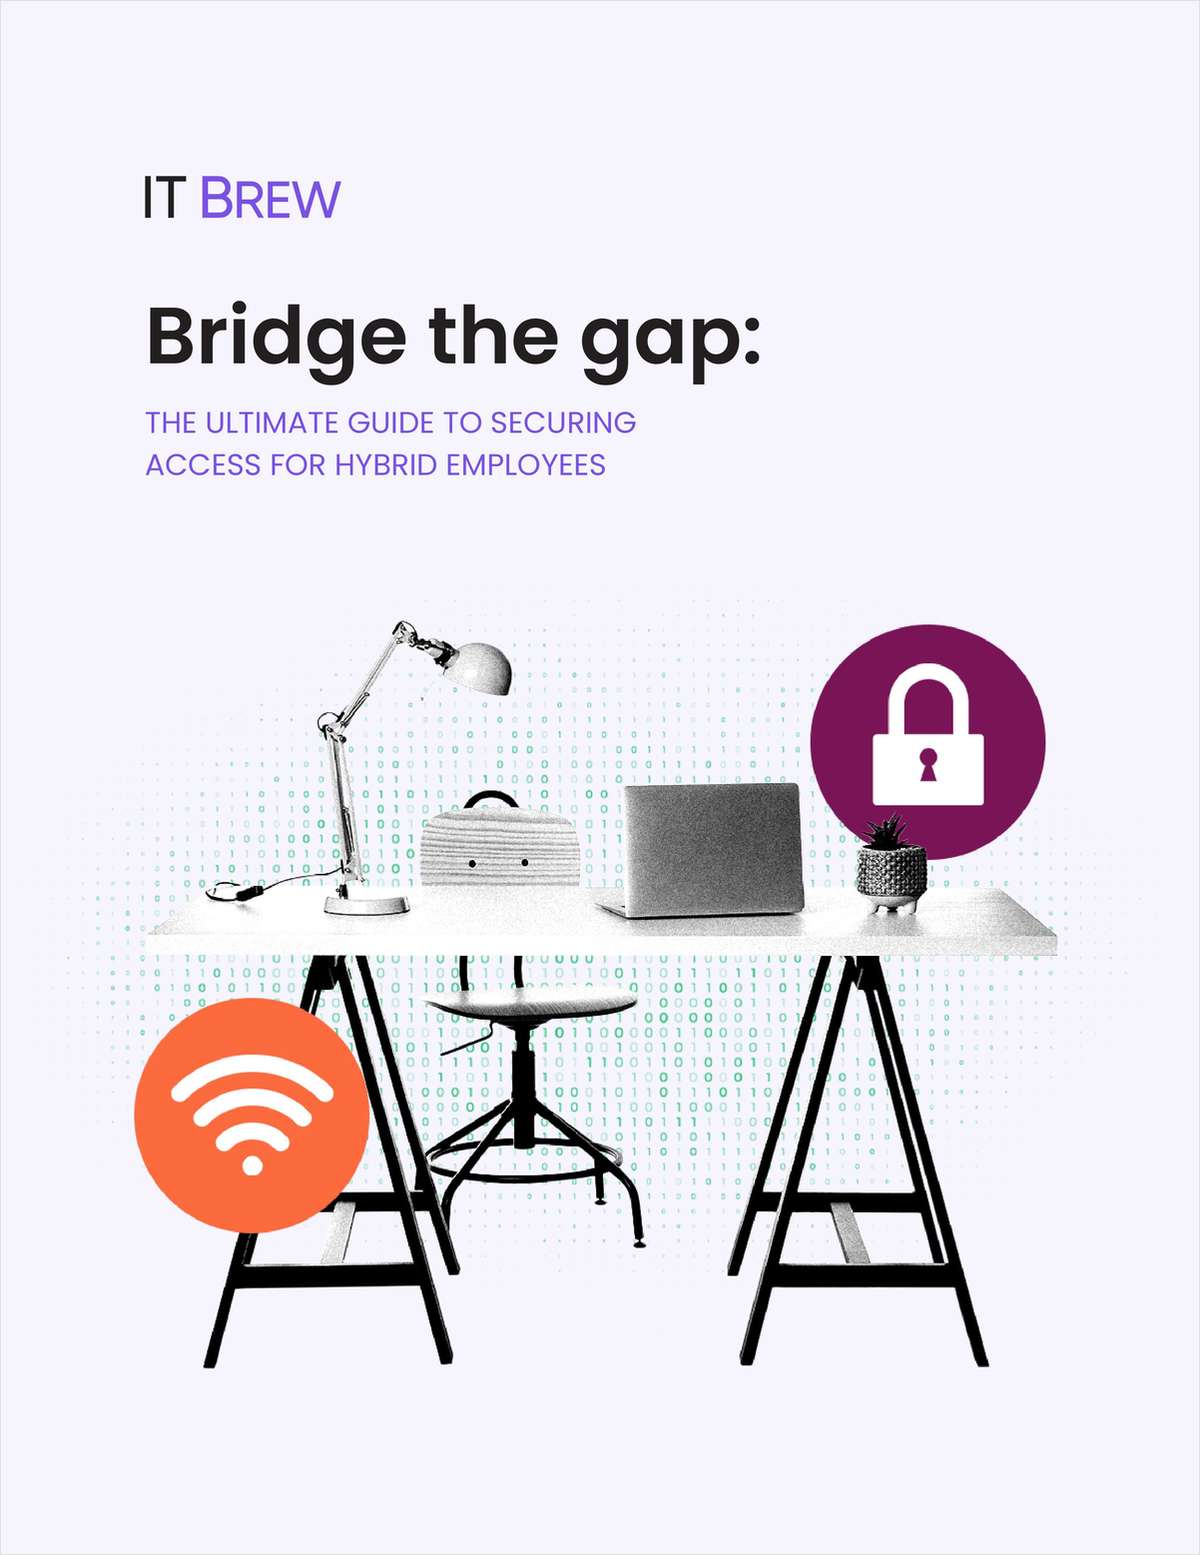 Bridge the gap: The Ultimate Guide to Securing Access for Hybrid Employees